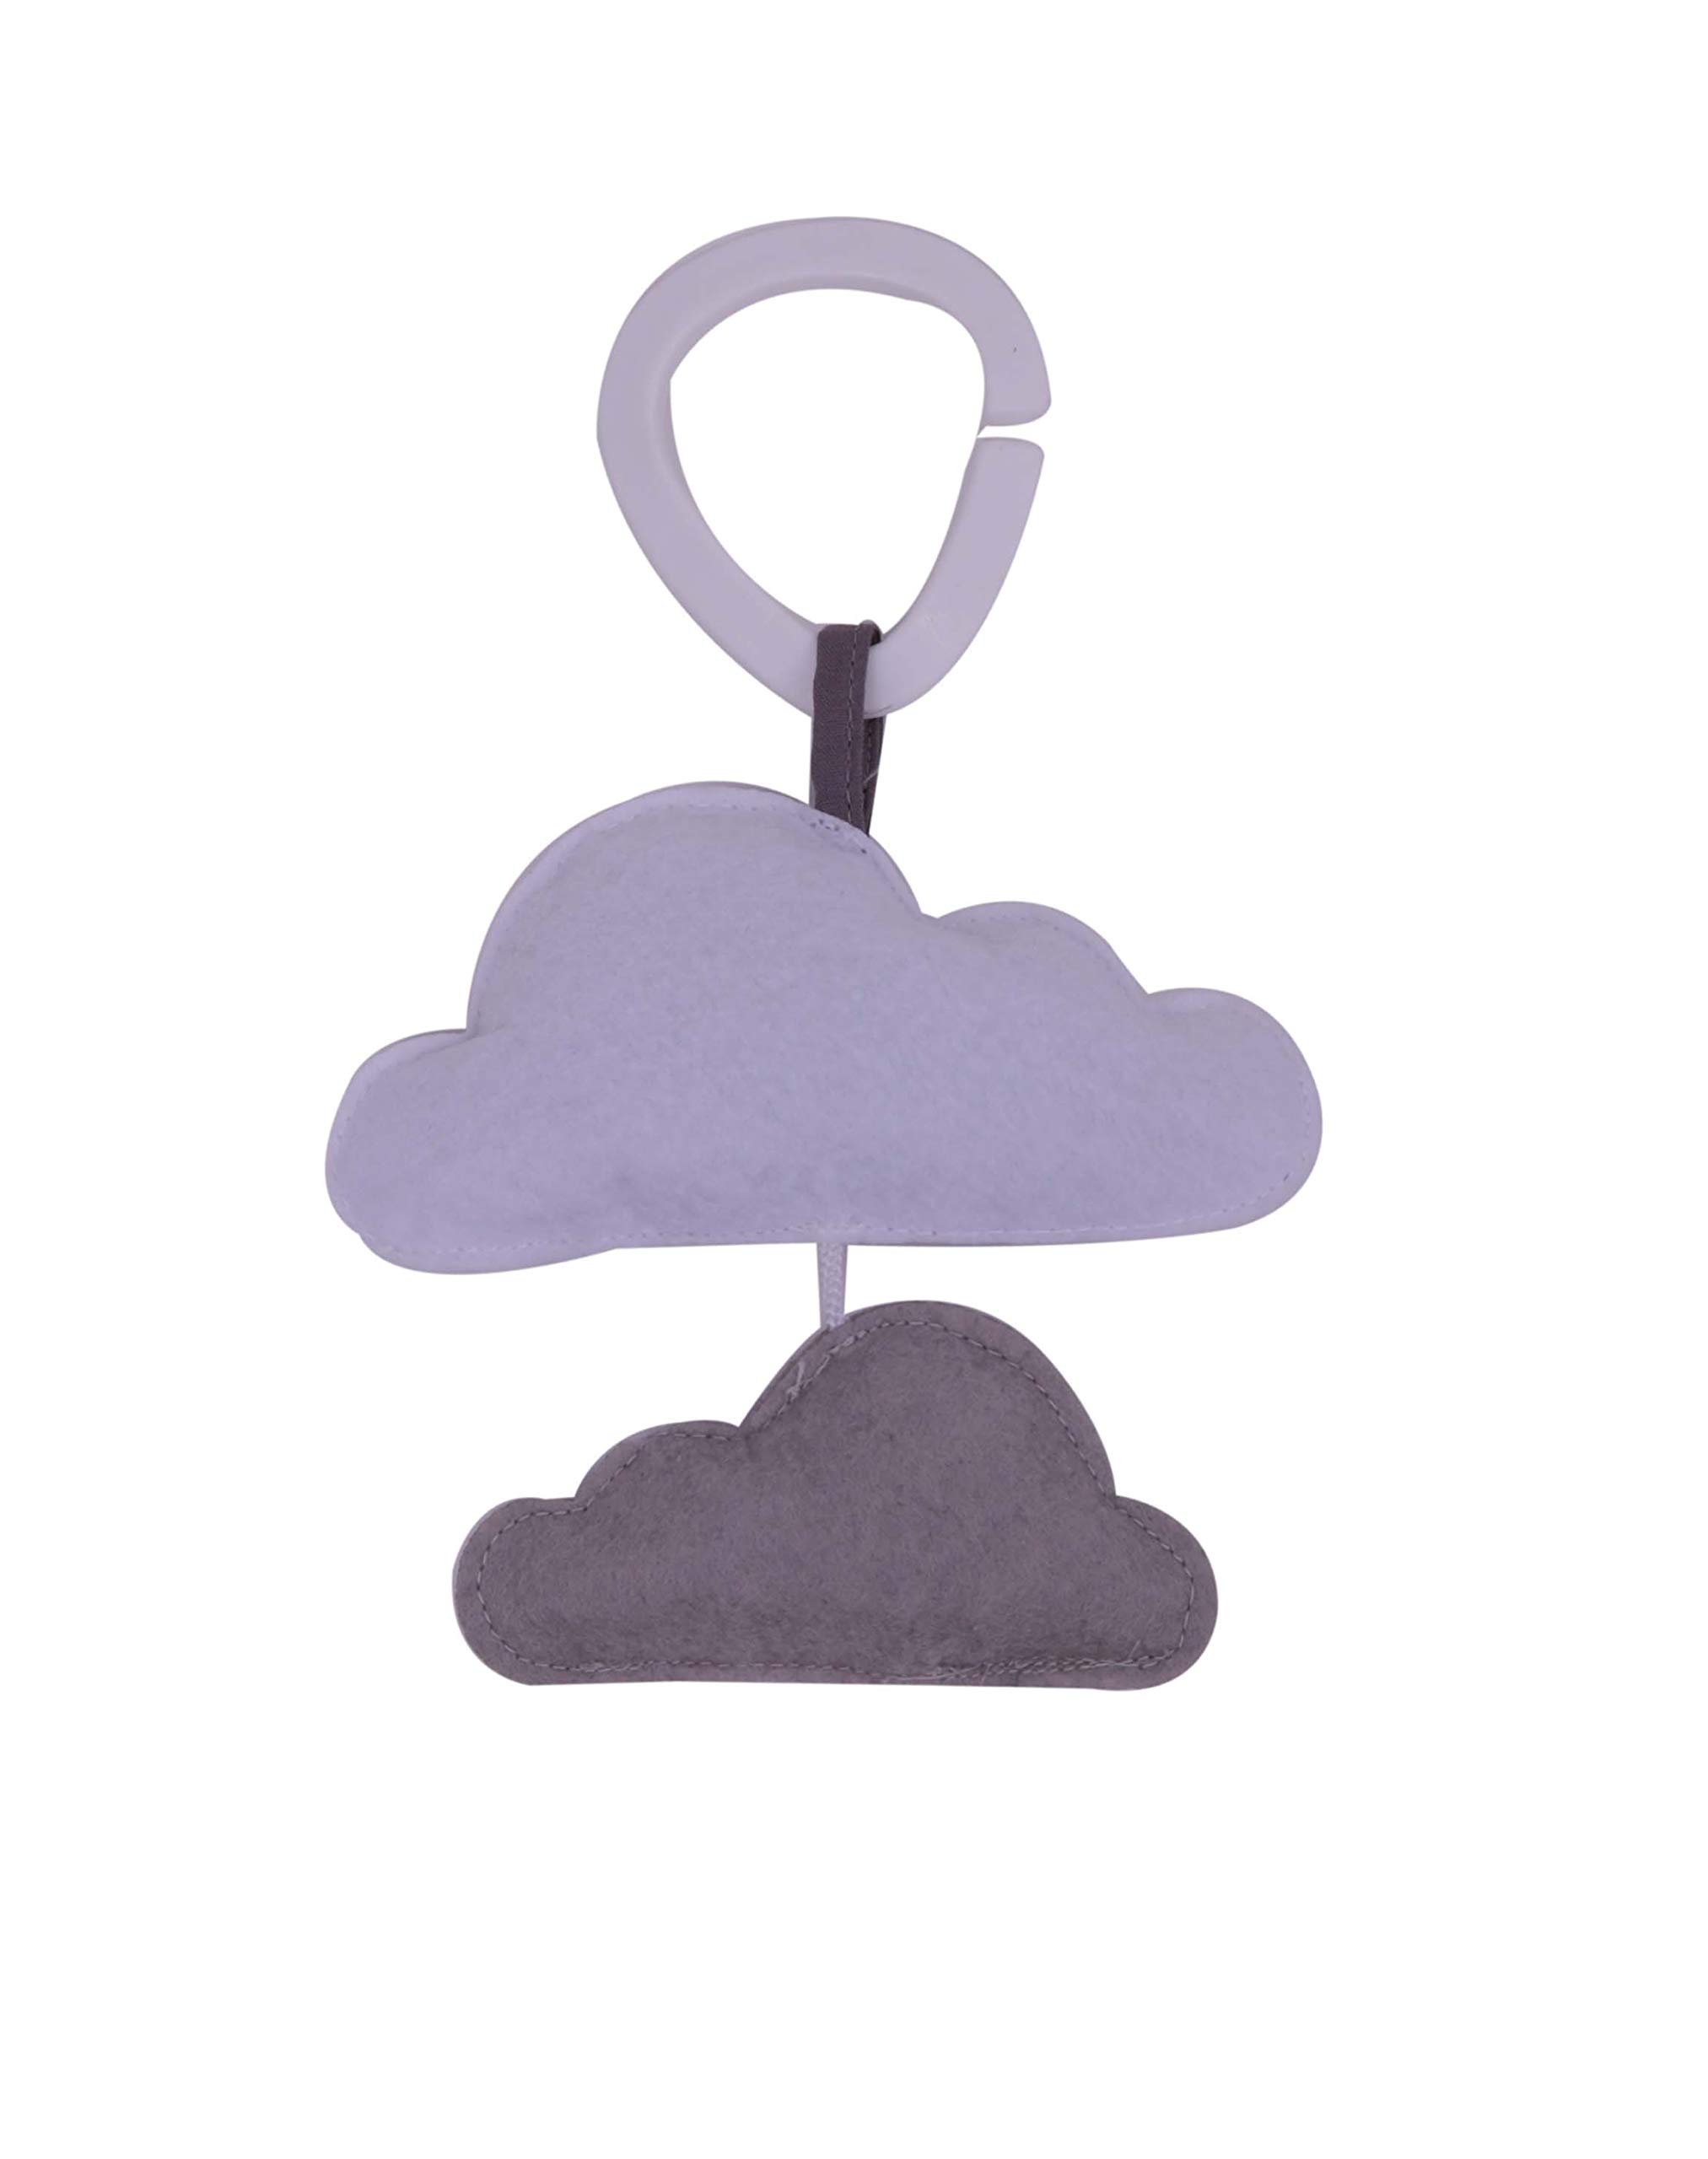 Bacati Clouds in The City Baby Play Gym with Mat, Mint/Grey